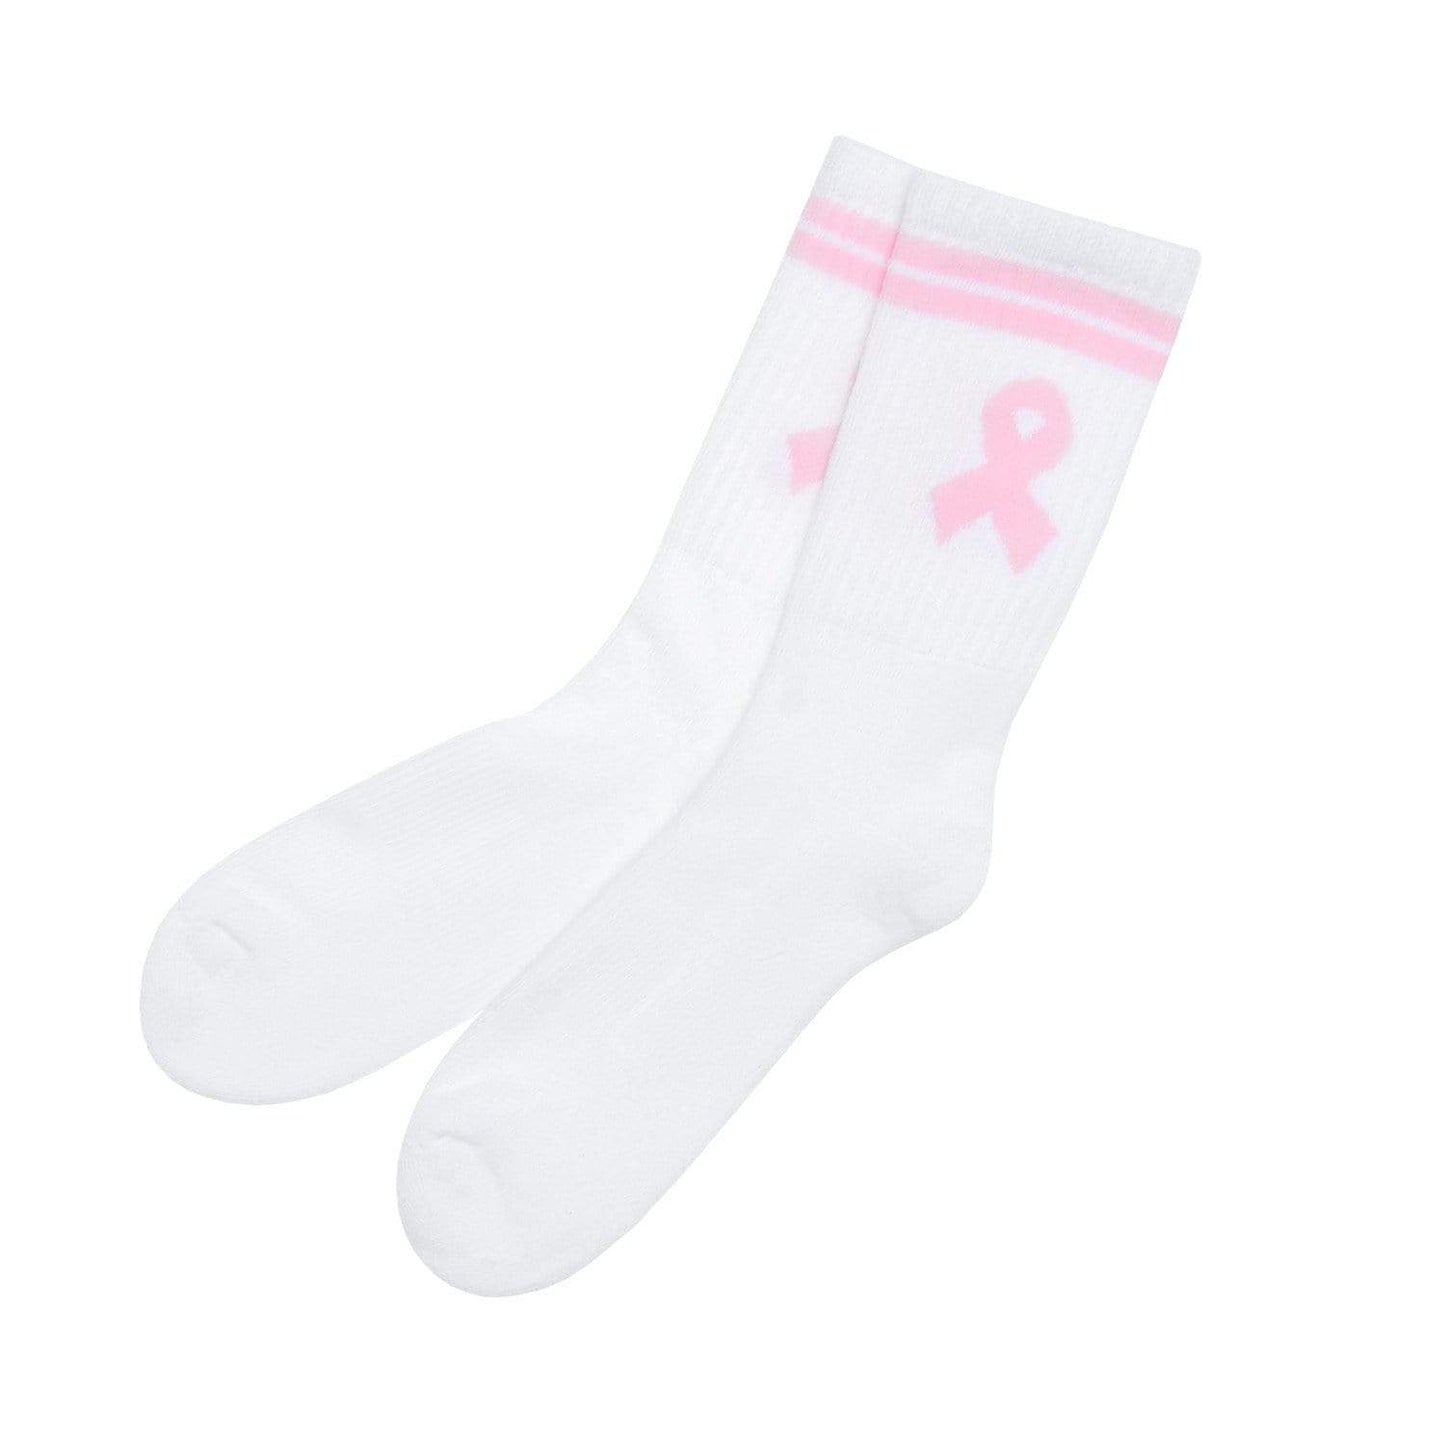 Breast Cancer Awareness Month Crew Socks - Adult